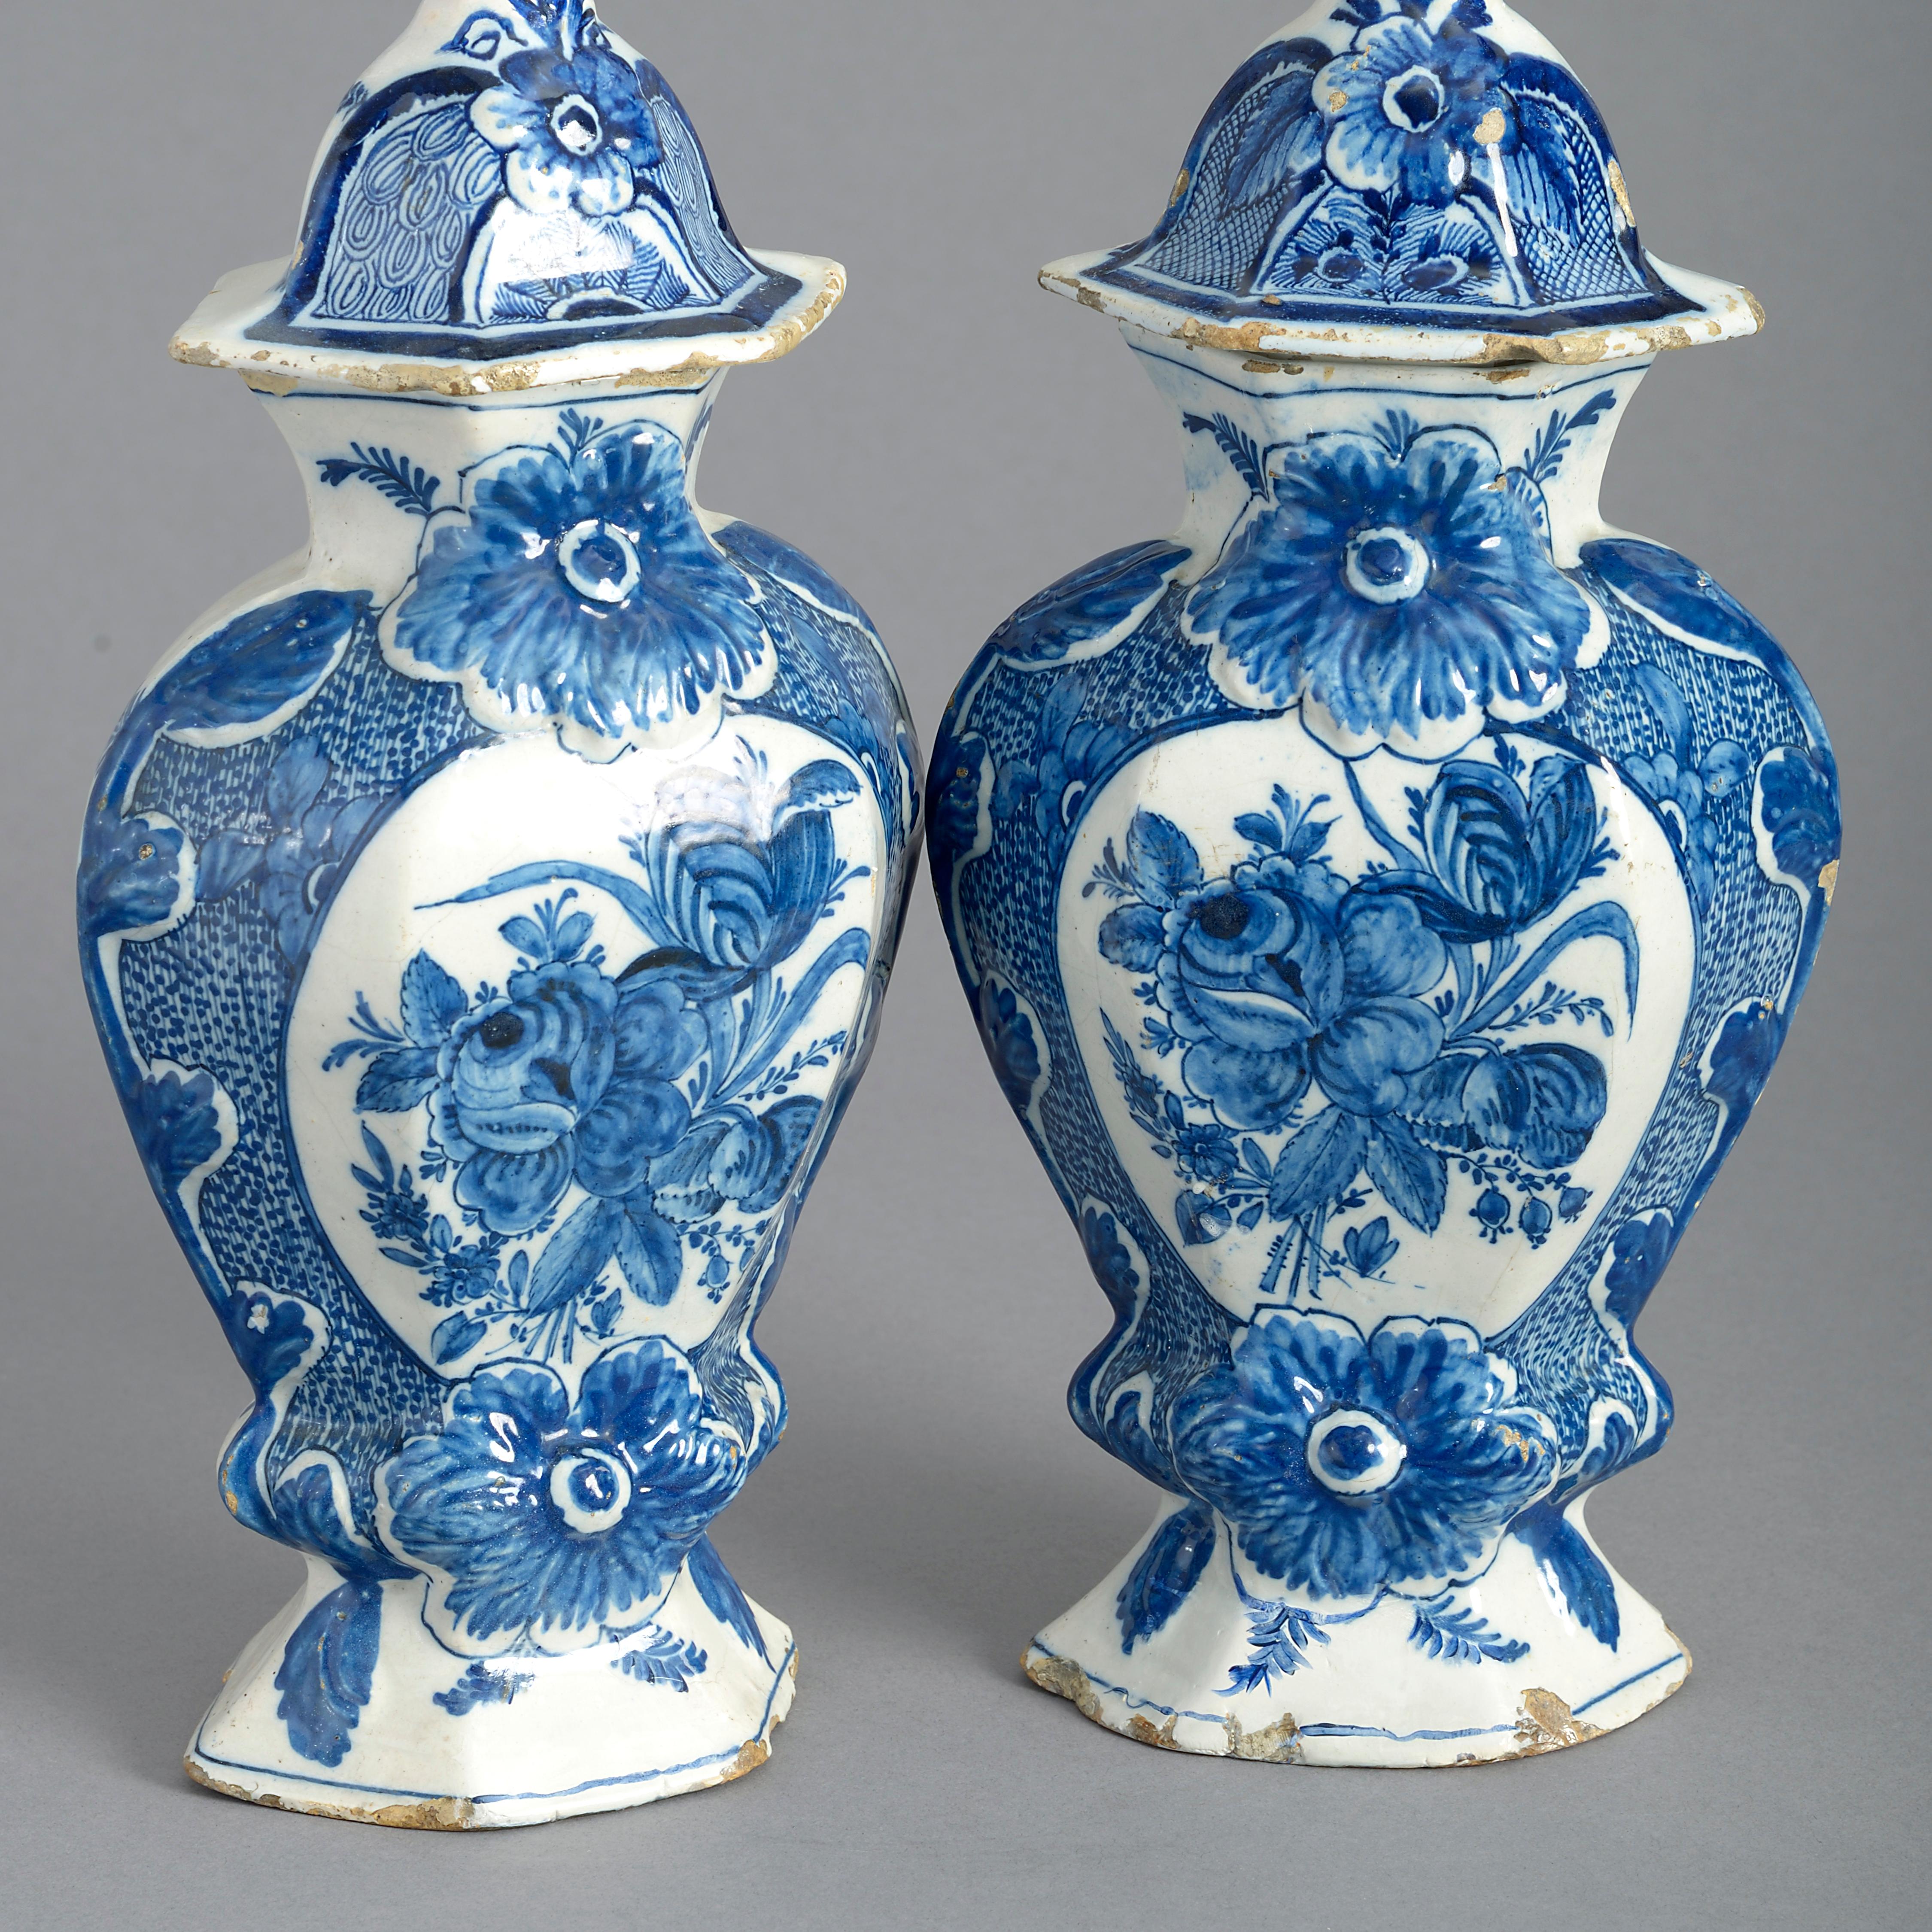 Chinoiserie Pair of 18th Century Blue and White Delft Vases